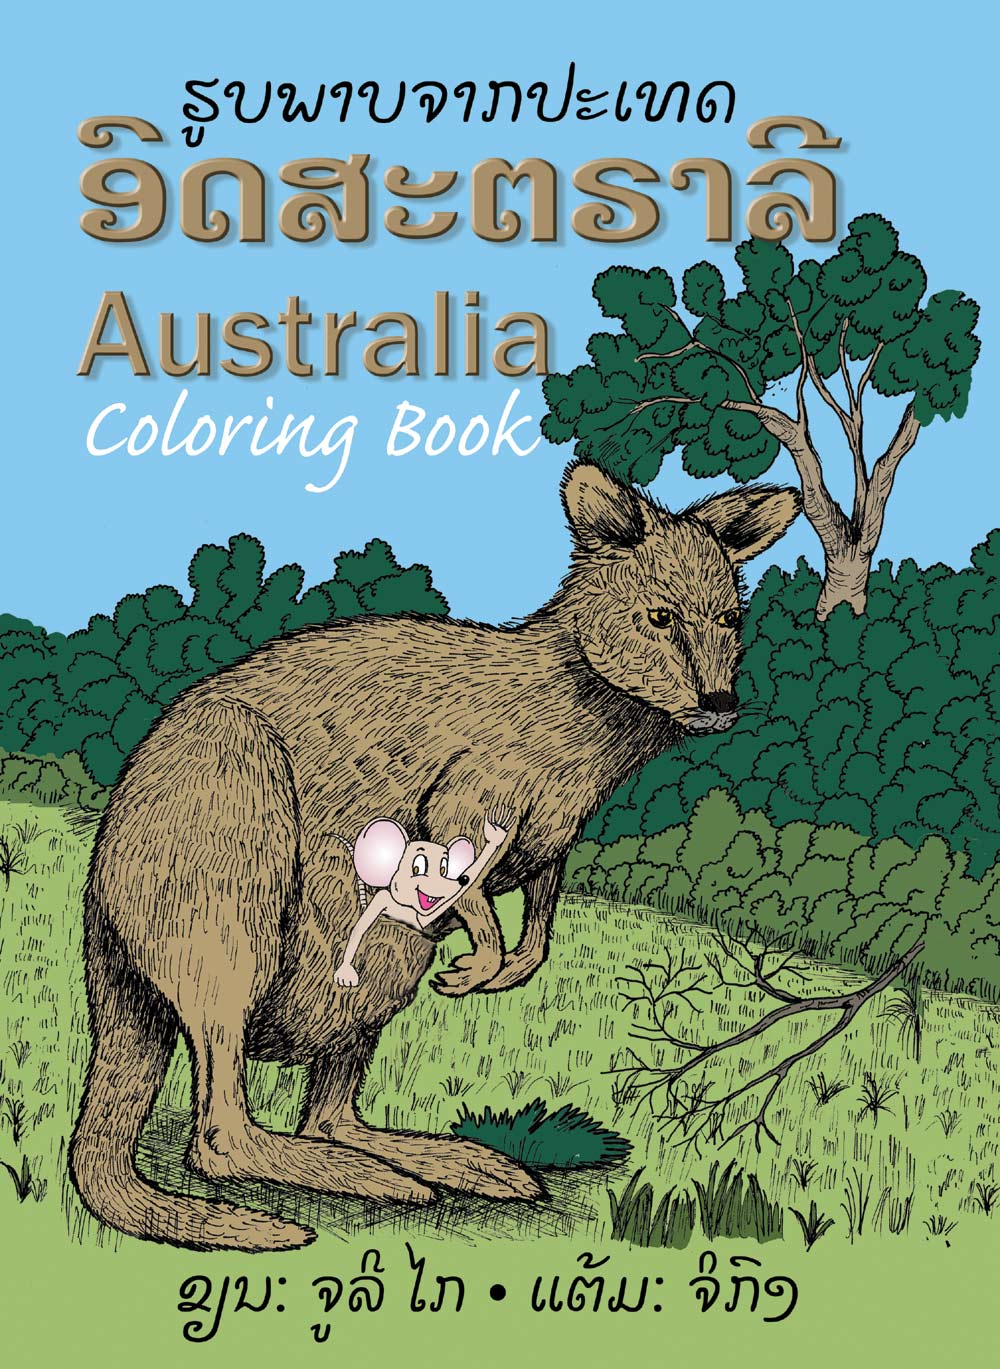 Australia Coloring Book large book cover, published in Lao and English